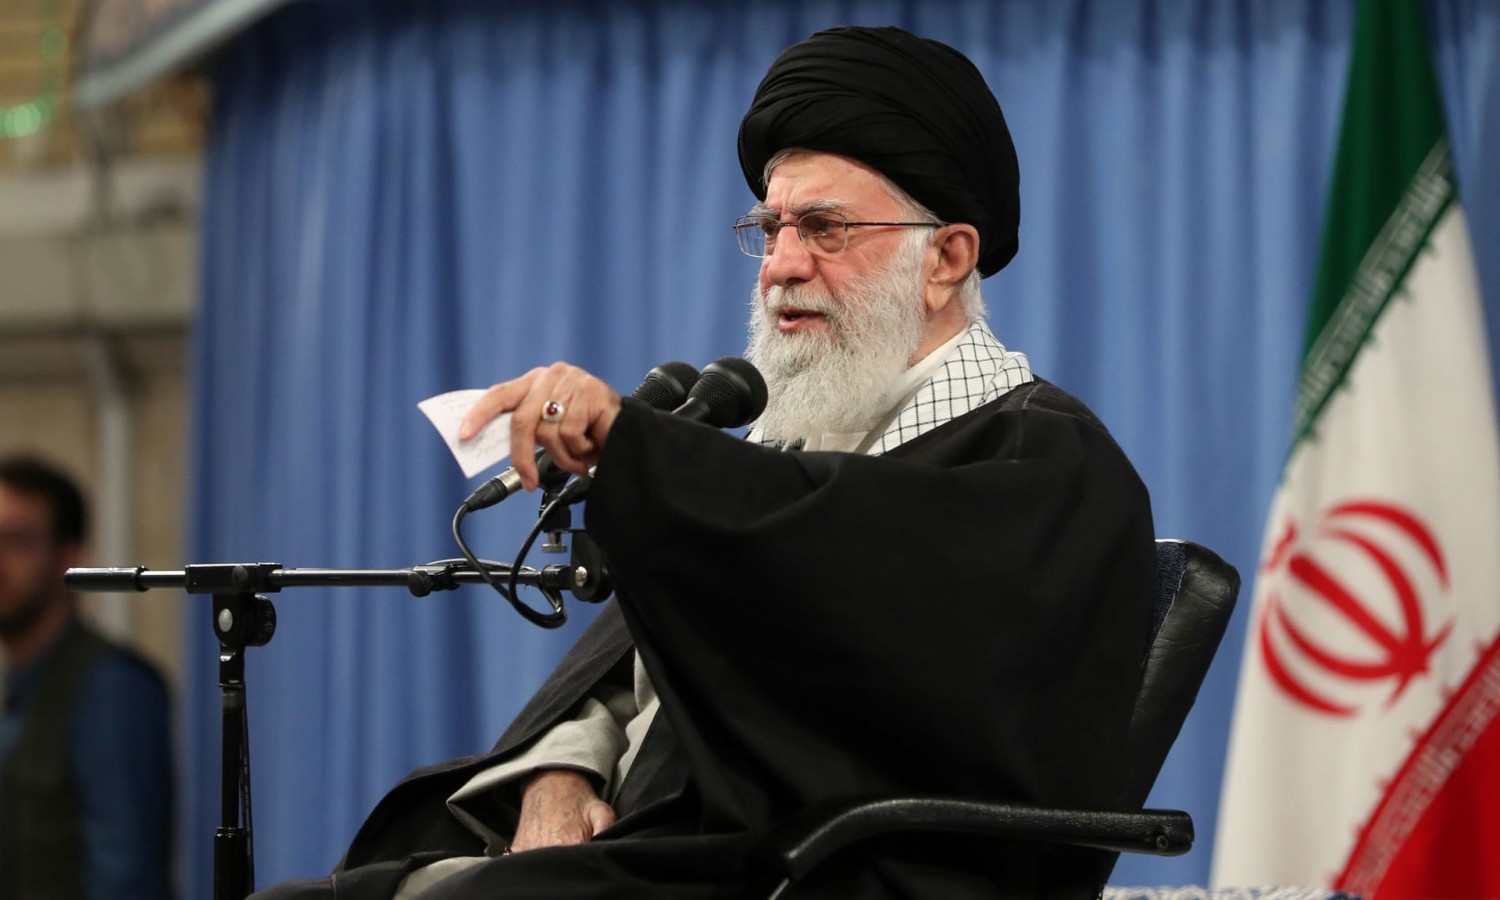 Iran’s supreme leader Ayatollah Ali Khamenei said a low turnout would benefit Donald Trump’s economic sanctions on the country. Photograph: Anadolu Agency via Getty Images